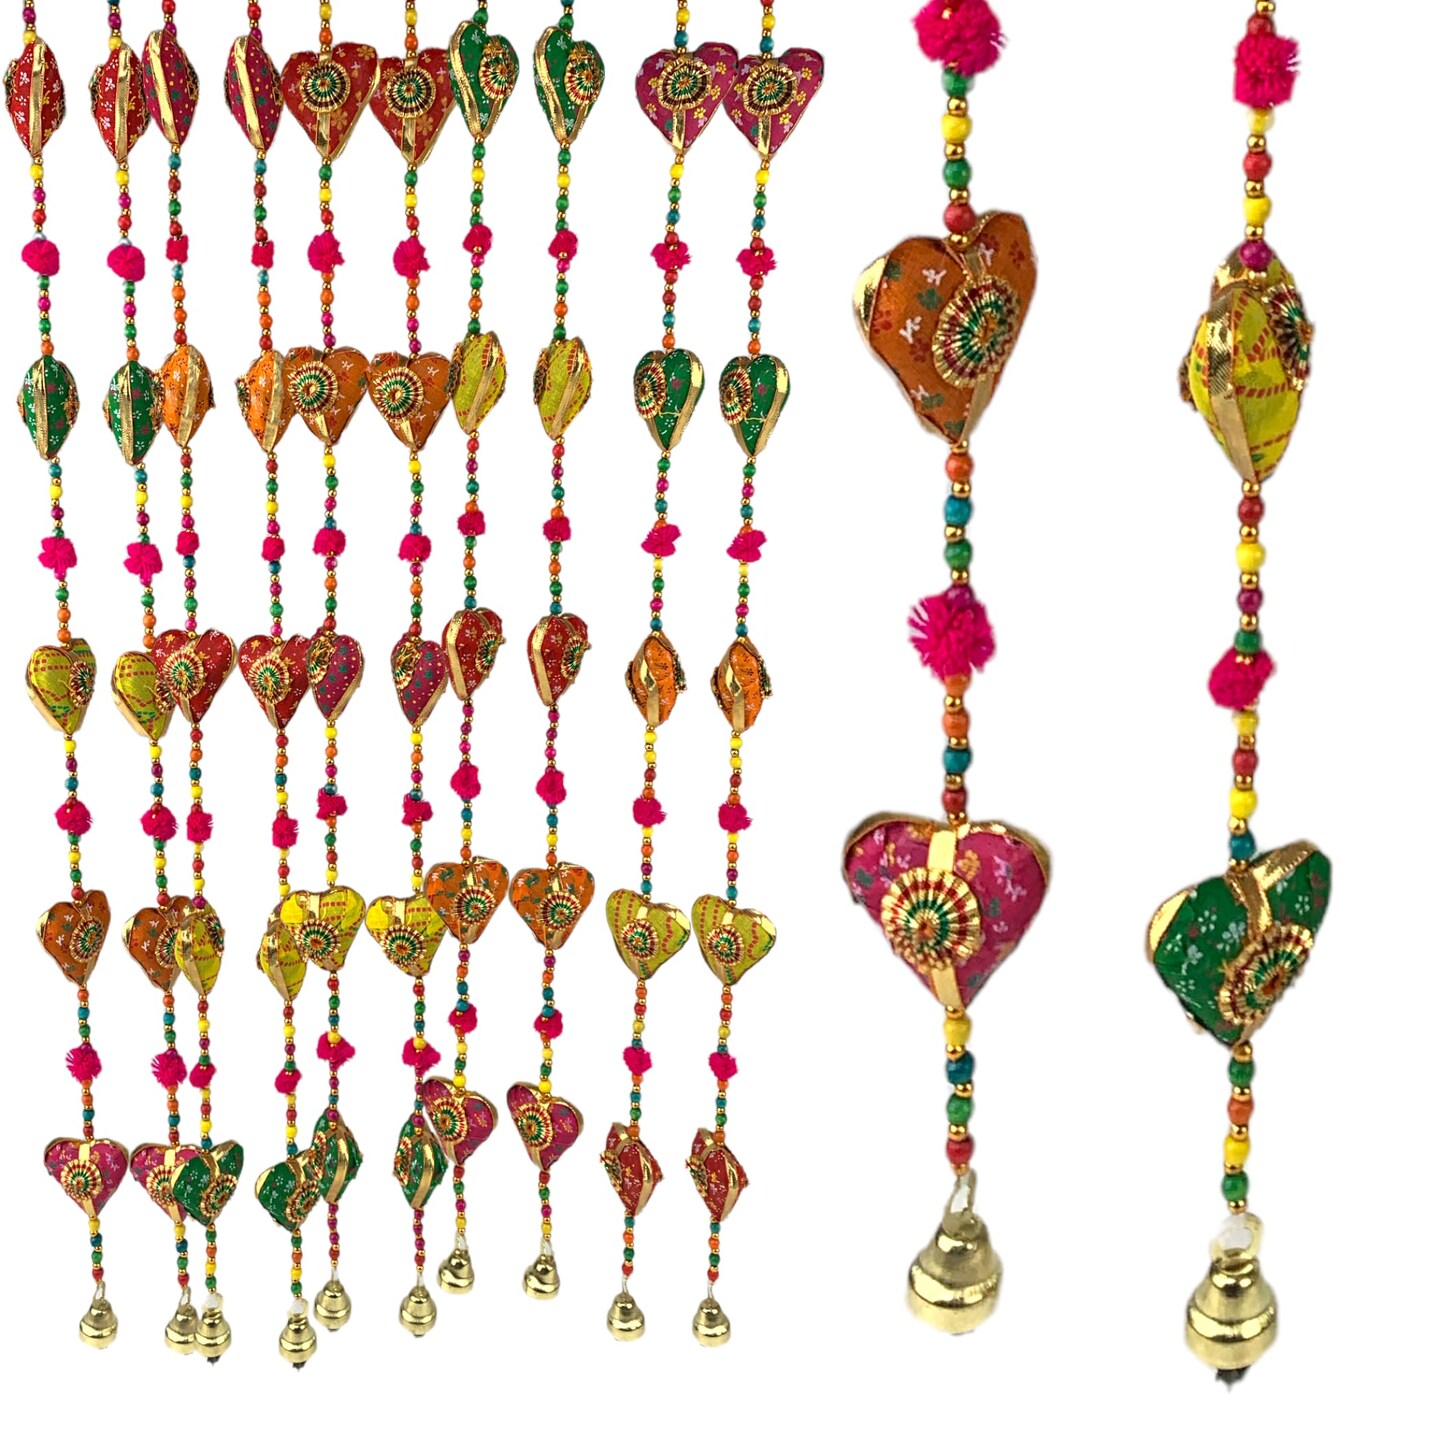 Rajasthani Door Hanging Wind Chime 6 Strings Rajasthani Wall Hanging Indian Wall Art Showpiece Home Decor Wind Chime For Home Decoration Garden Patio Decor Housewarming Gifts